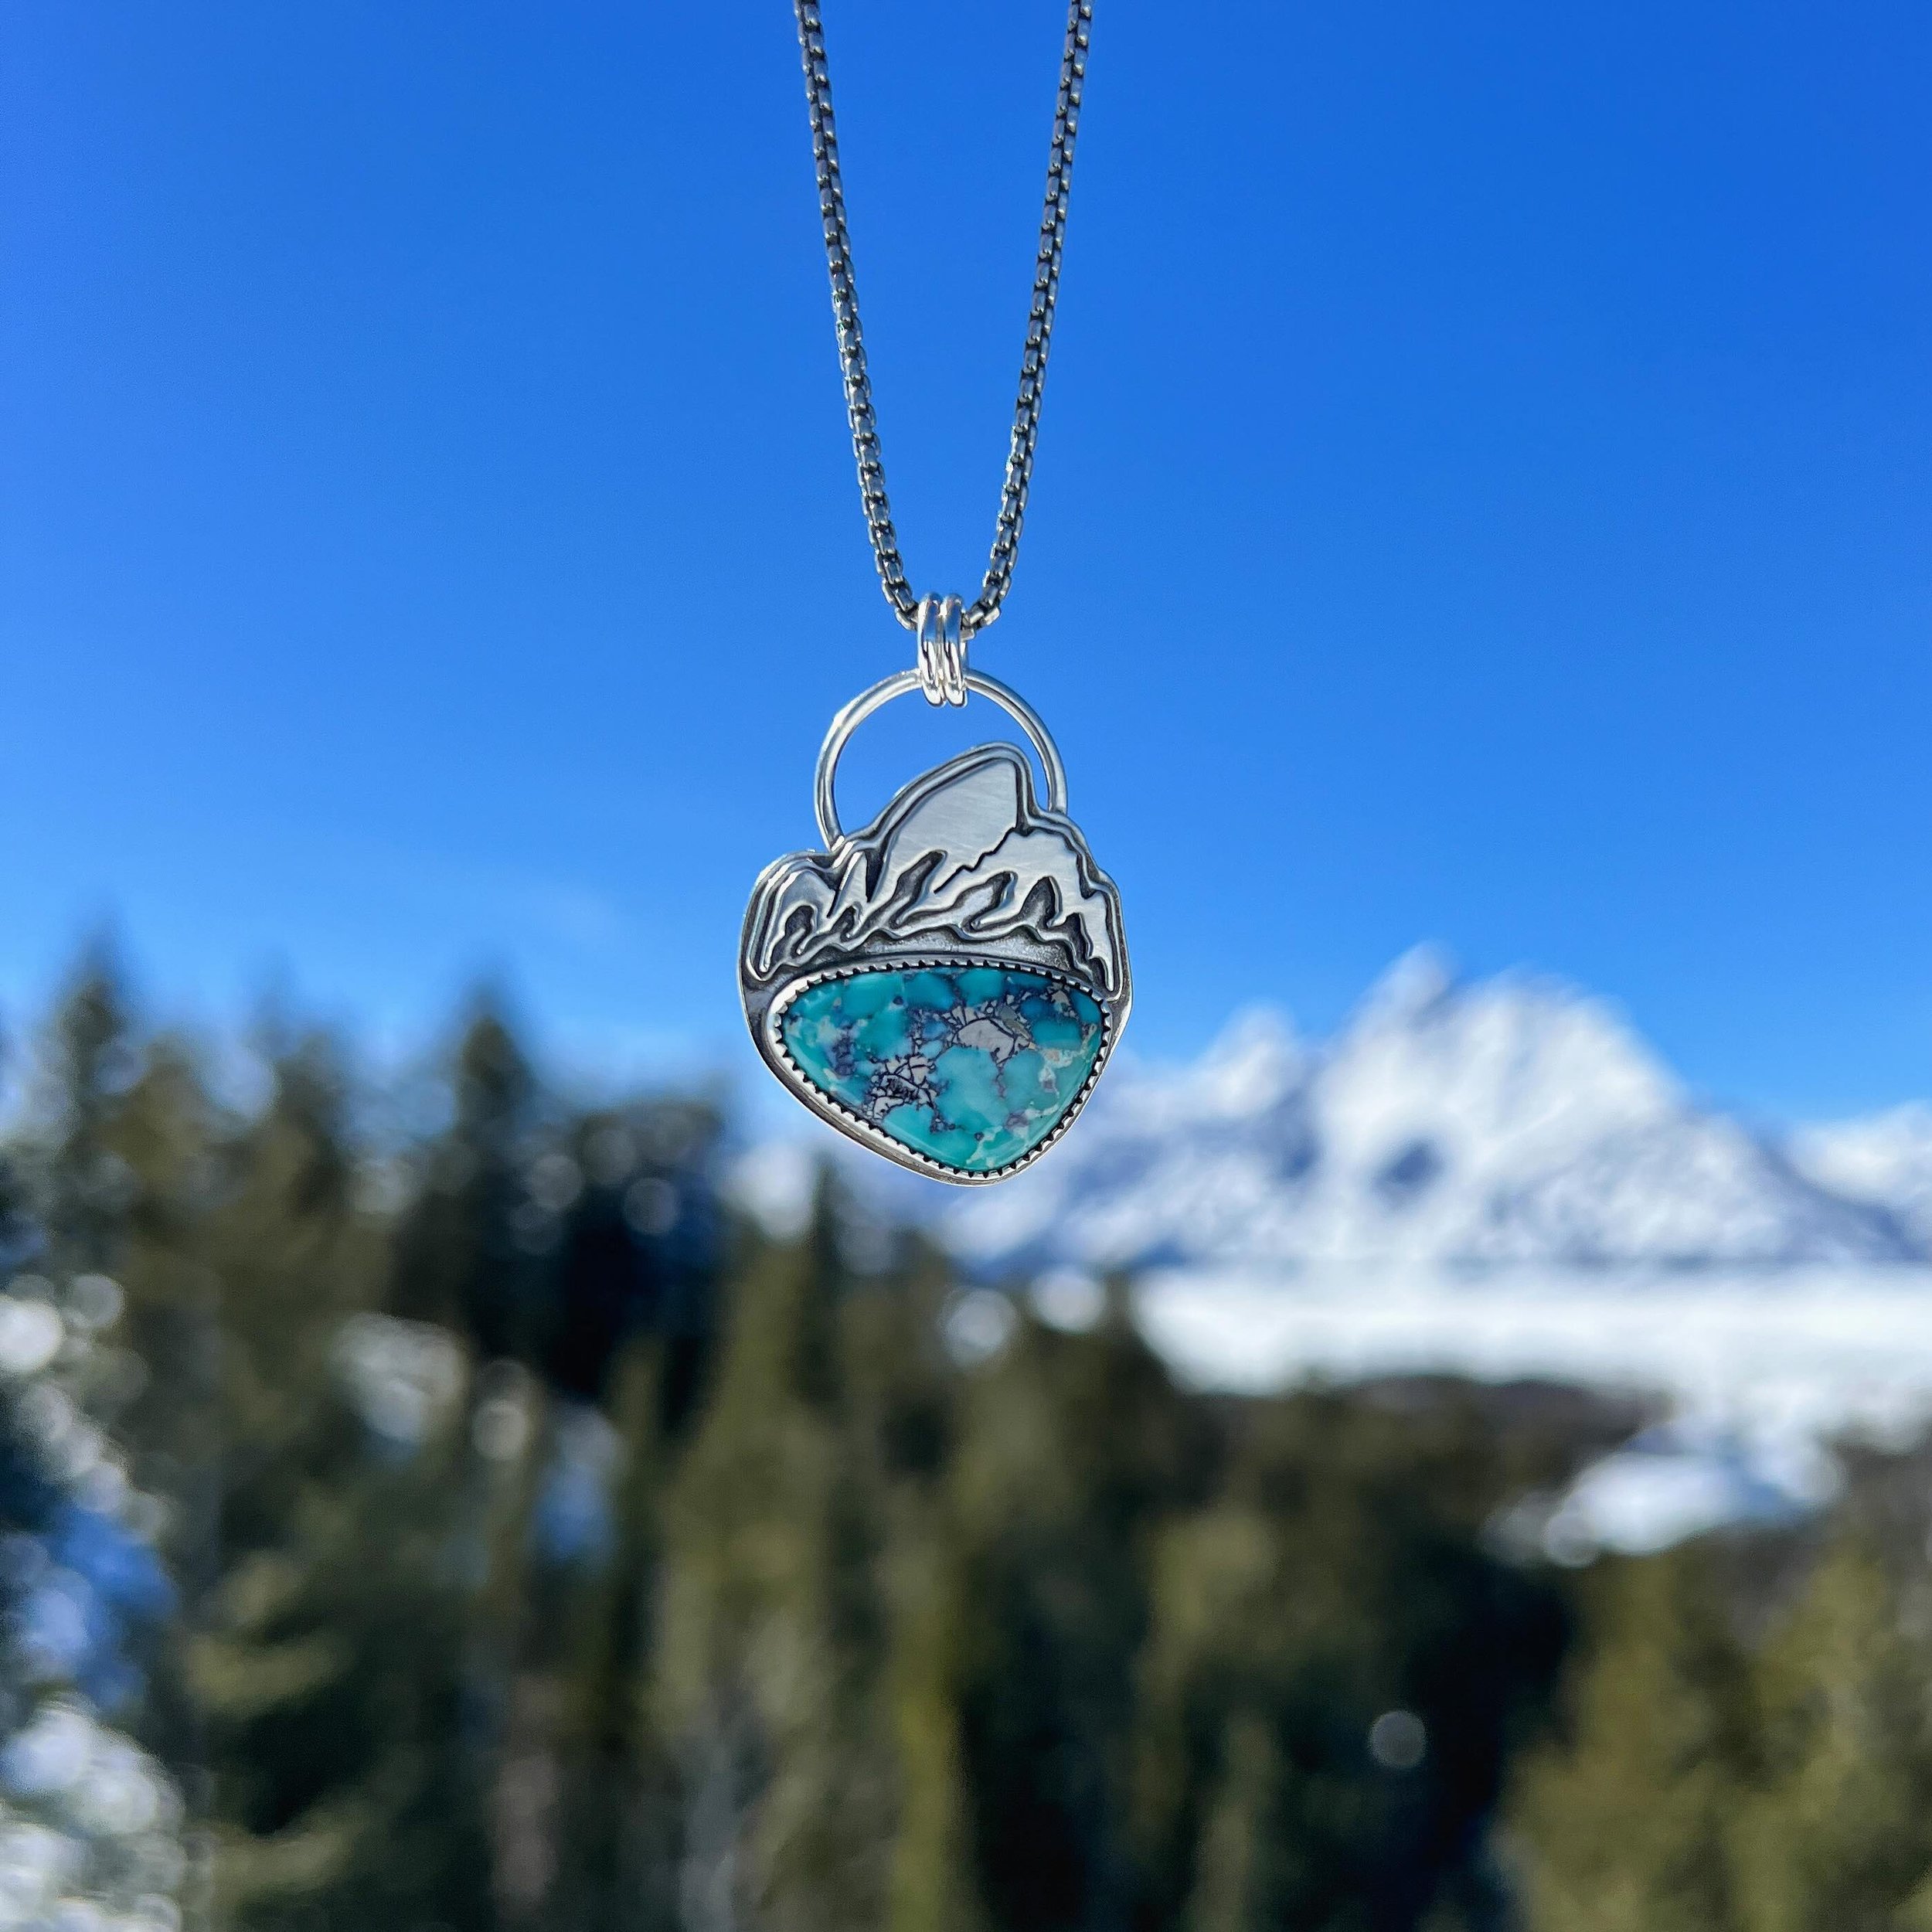 Shop update is now live! Teton pendant featuring high grade, Whitewater Turquoise. This babe is ready for your next adventure!